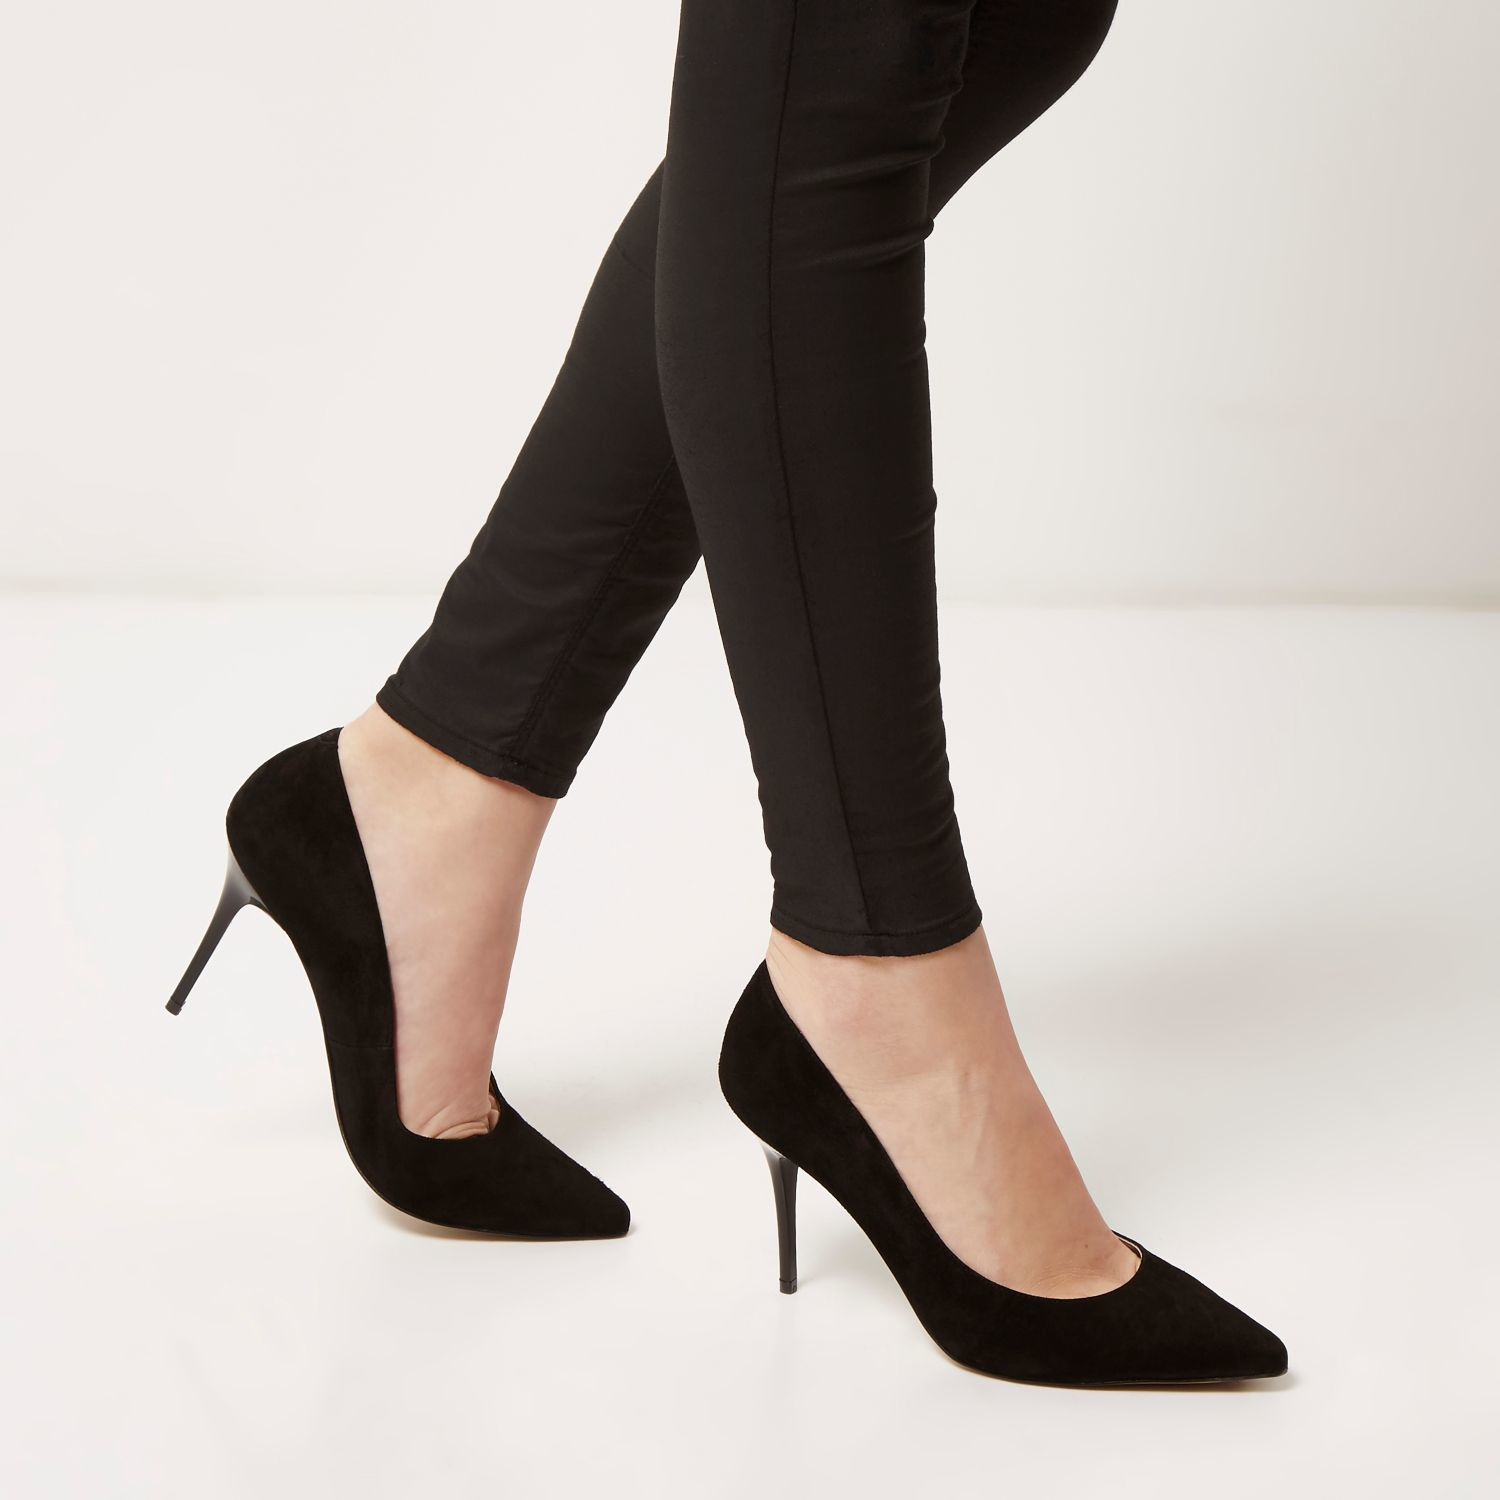 Lyst - River Island Black Suede Pointed Mid Heel Court ...